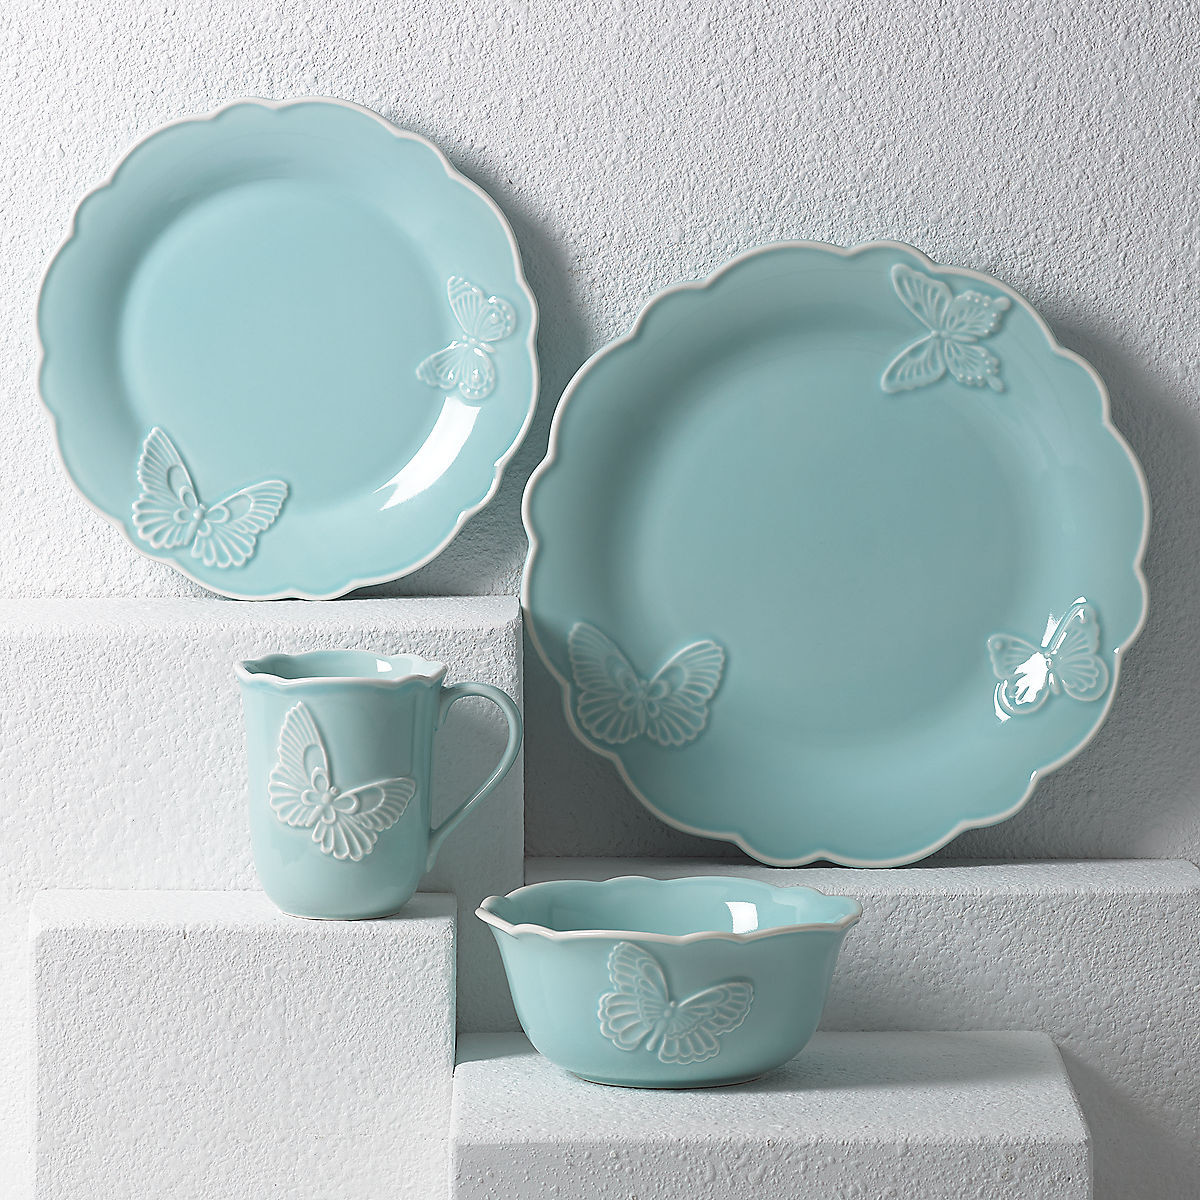 14 Great Kate Spade Lenox Vase 2024 free download kate spade lenox vase of butterfly meadow carved blue 4 pc place setting new dinnerware pertaining to butterfly meadow carved blue 4 pc place setting